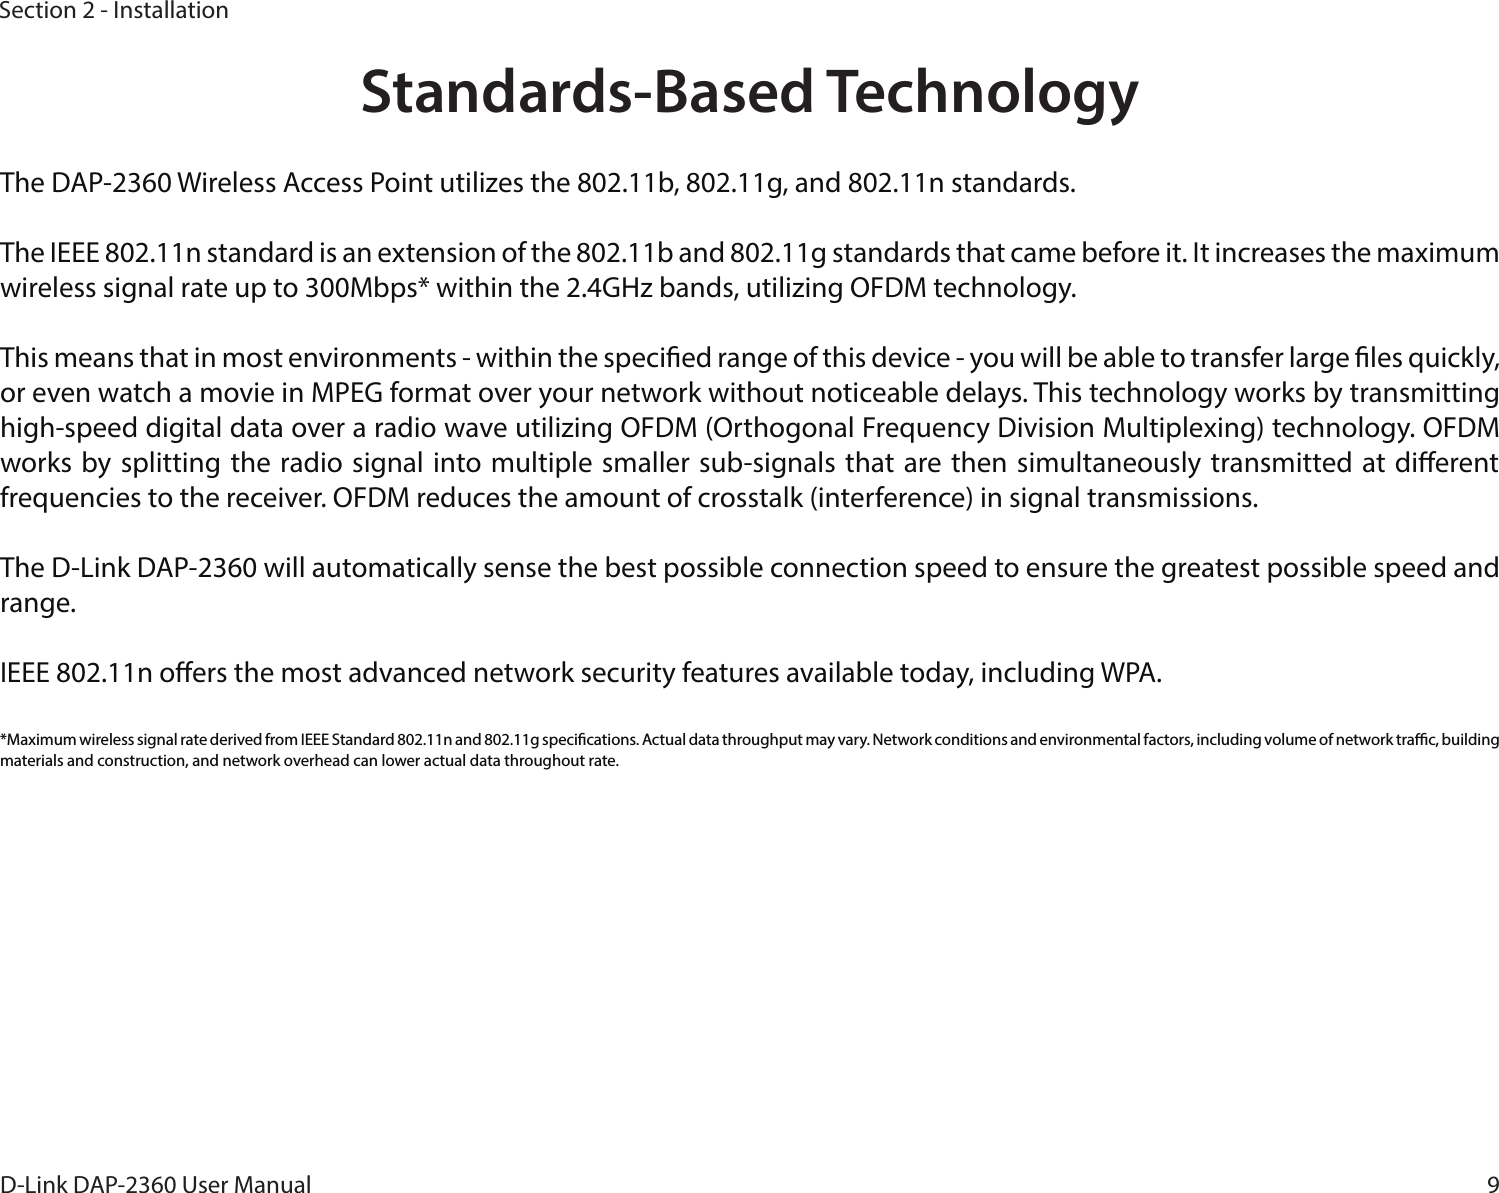 9D-Link DAP-2360 User ManualSection 2 - InstallationStandards-Based TechnologyThe DAP-2360 Wireless Access Point utilizes the 802.11b, 802.11g, and 802.11n standards.The IEEE 802.11n standard is an extension of the 802.11b and 802.11g standards that came before it. It increases the maximum wireless signal rate up to 300Mbps* within the 2.4GHz bands, utilizing OFDM technology.This means that in most environments - within the specied range of this device - you will be able to transfer large les quickly, or even watch a movie in MPEG format over your network without noticeable delays. This technology works by transmitting high-speed digital data over a radio wave utilizing OFDM (Orthogonal Frequency Division Multiplexing) technology. OFDM works by splitting  the radio signal into multiple  smaller sub-signals that are then simultaneously transmitted at dierent frequencies to the receiver. OFDM reduces the amount of crosstalk (interference) in signal transmissions. The D-Link DAP-2360 will automatically sense the best possible connection speed to ensure the greatest possible speed and range.IEEE 802.11n oers the most advanced network security features available today, including WPA.*Maximum wireless signal rate derived from IEEE Standard 802.11n and 802.11g specications. Actual data throughput may vary. Network conditions and environmental factors, including volume of network trac, building materials and construction, and network overhead can lower actual data throughout rate.